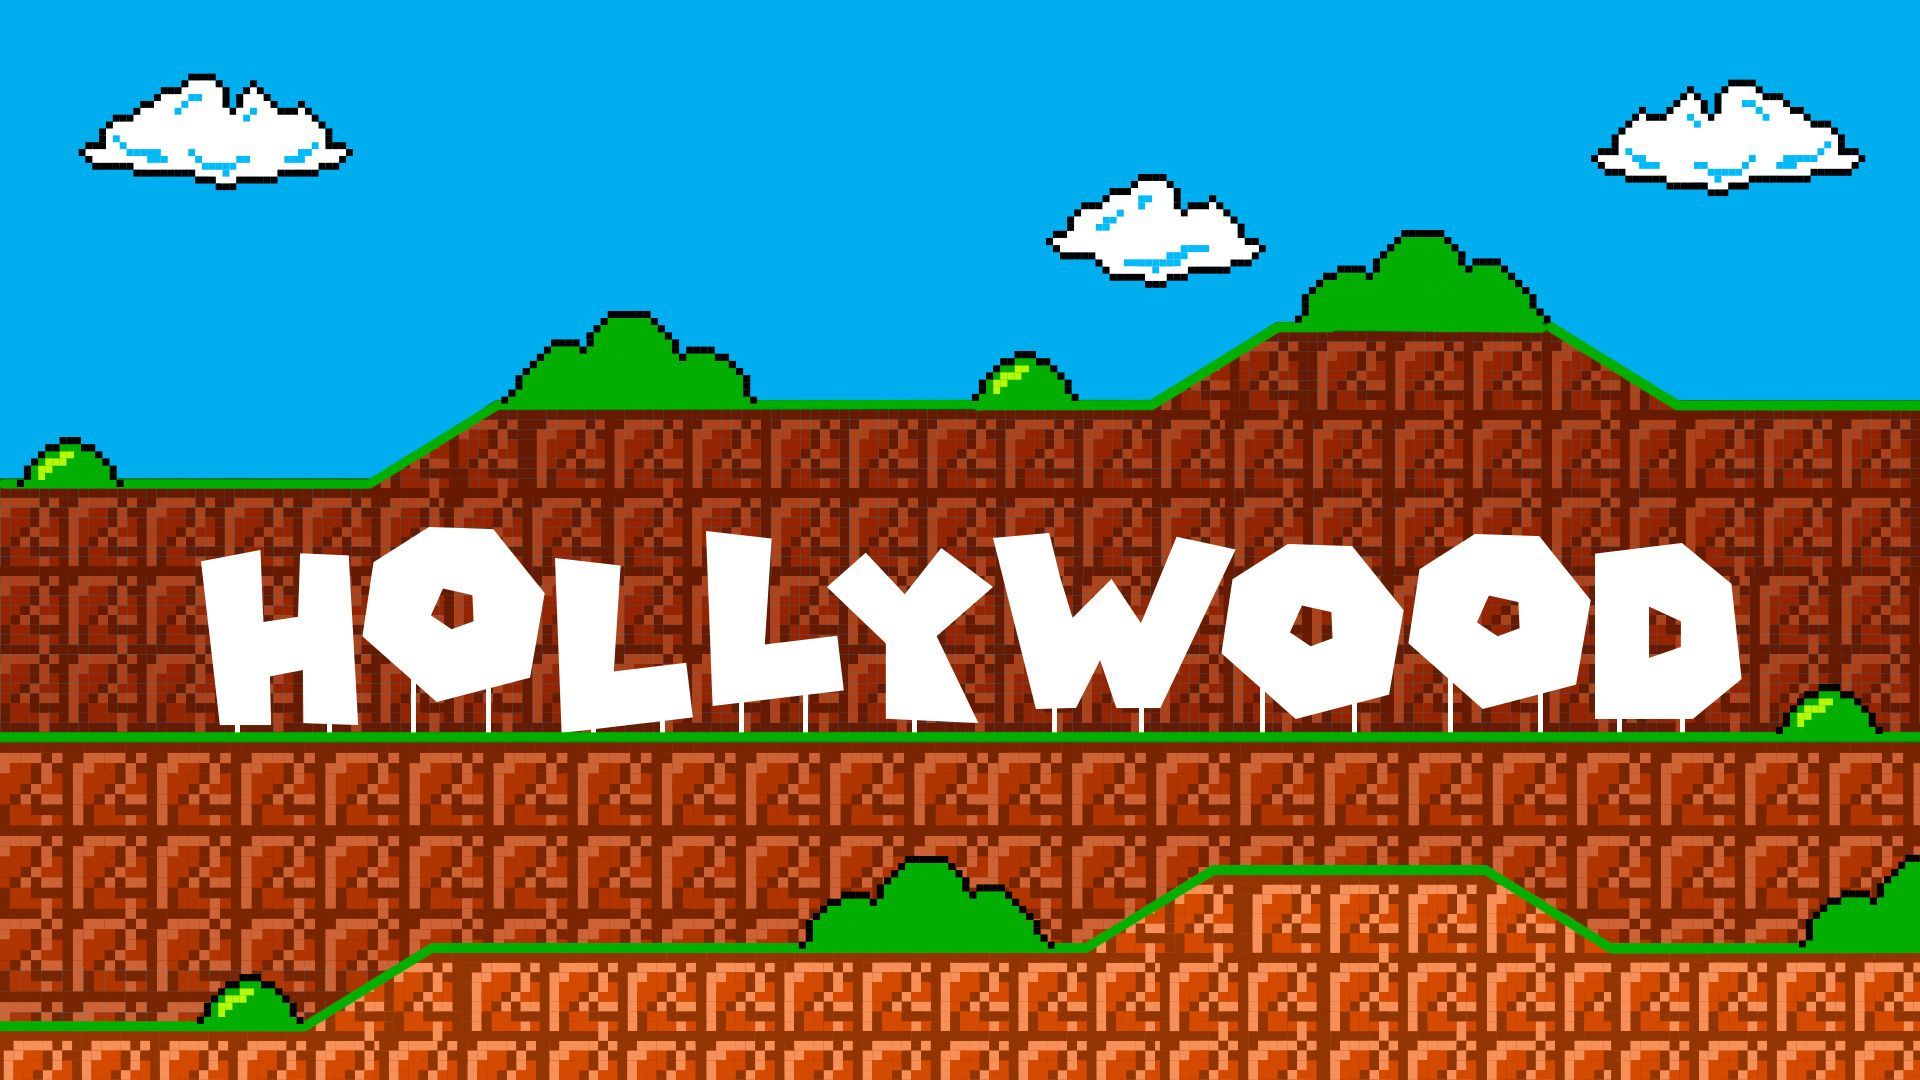 Illustration of the Hollywood sign stylized as a Super Mario level.